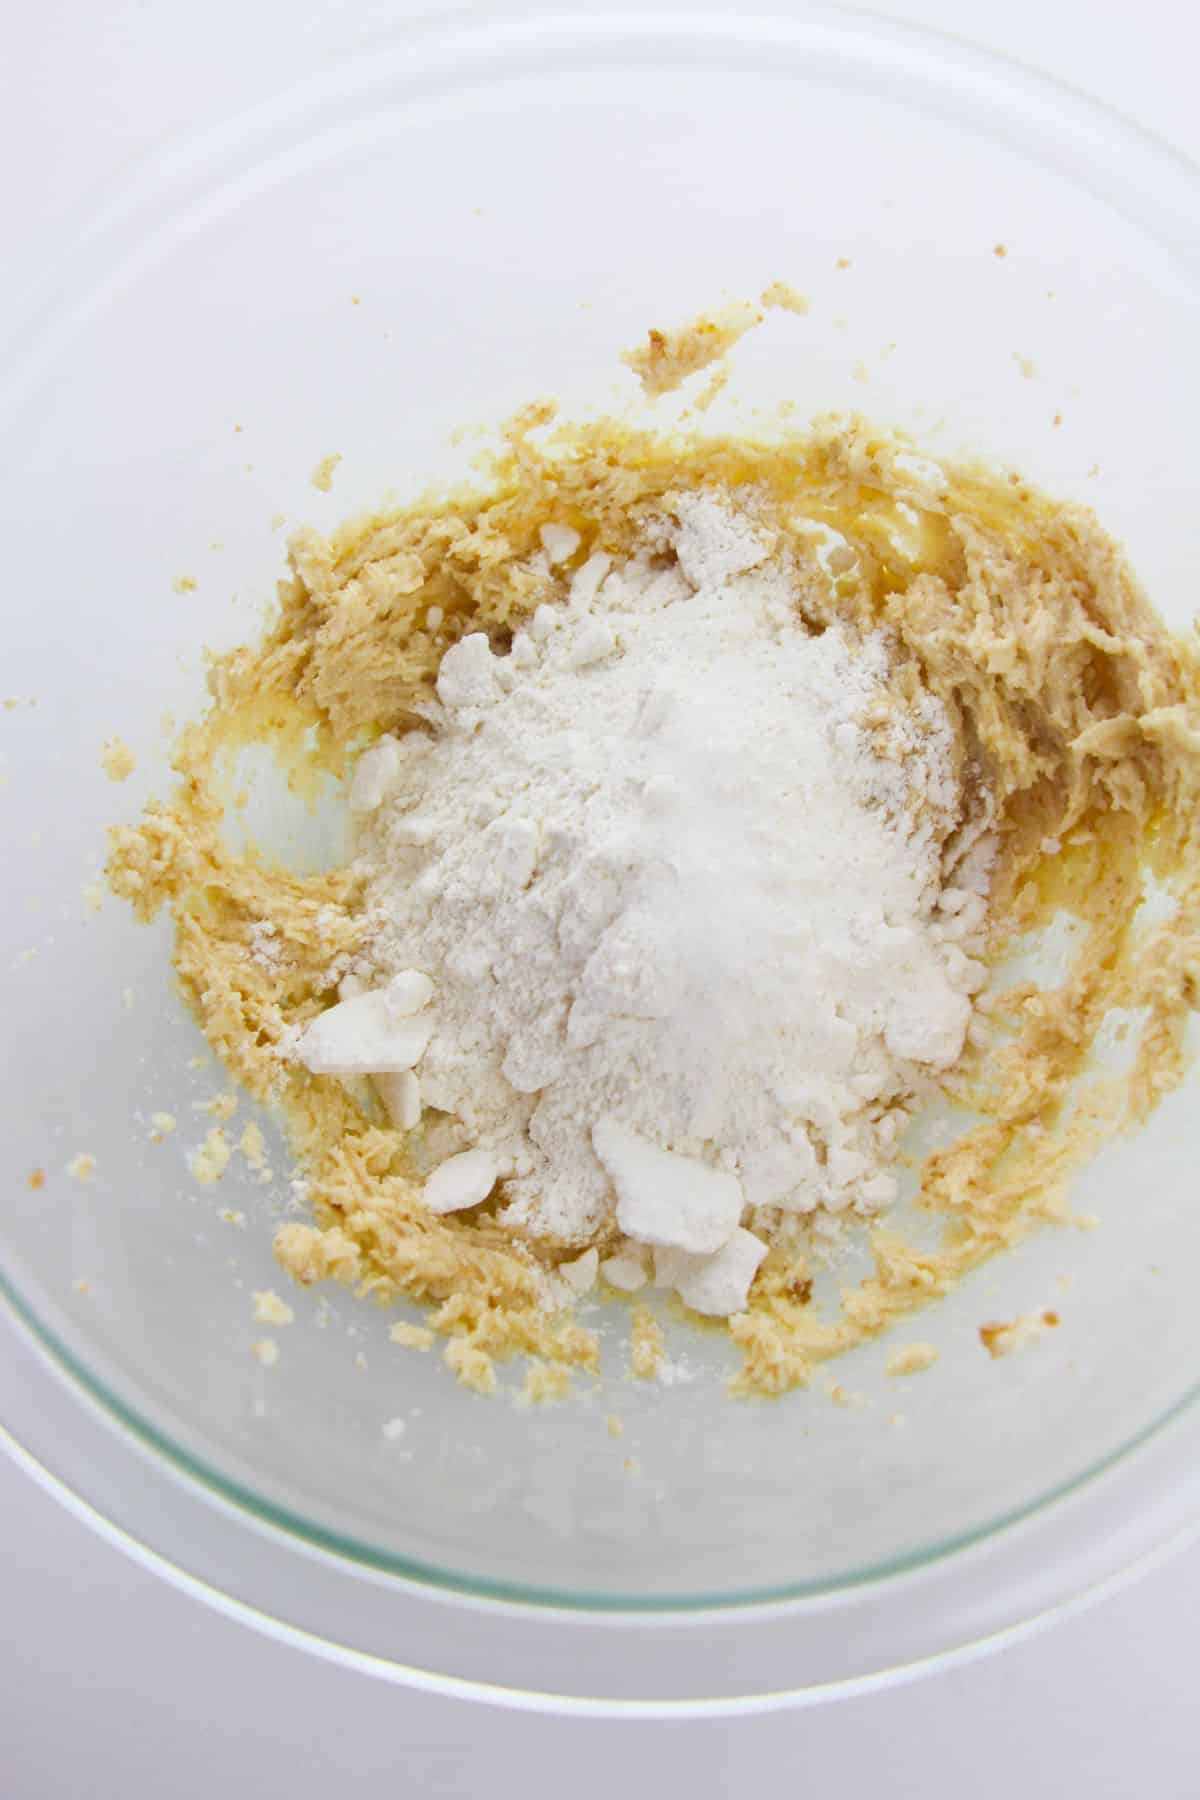 Flour and salt are added to the mixture.